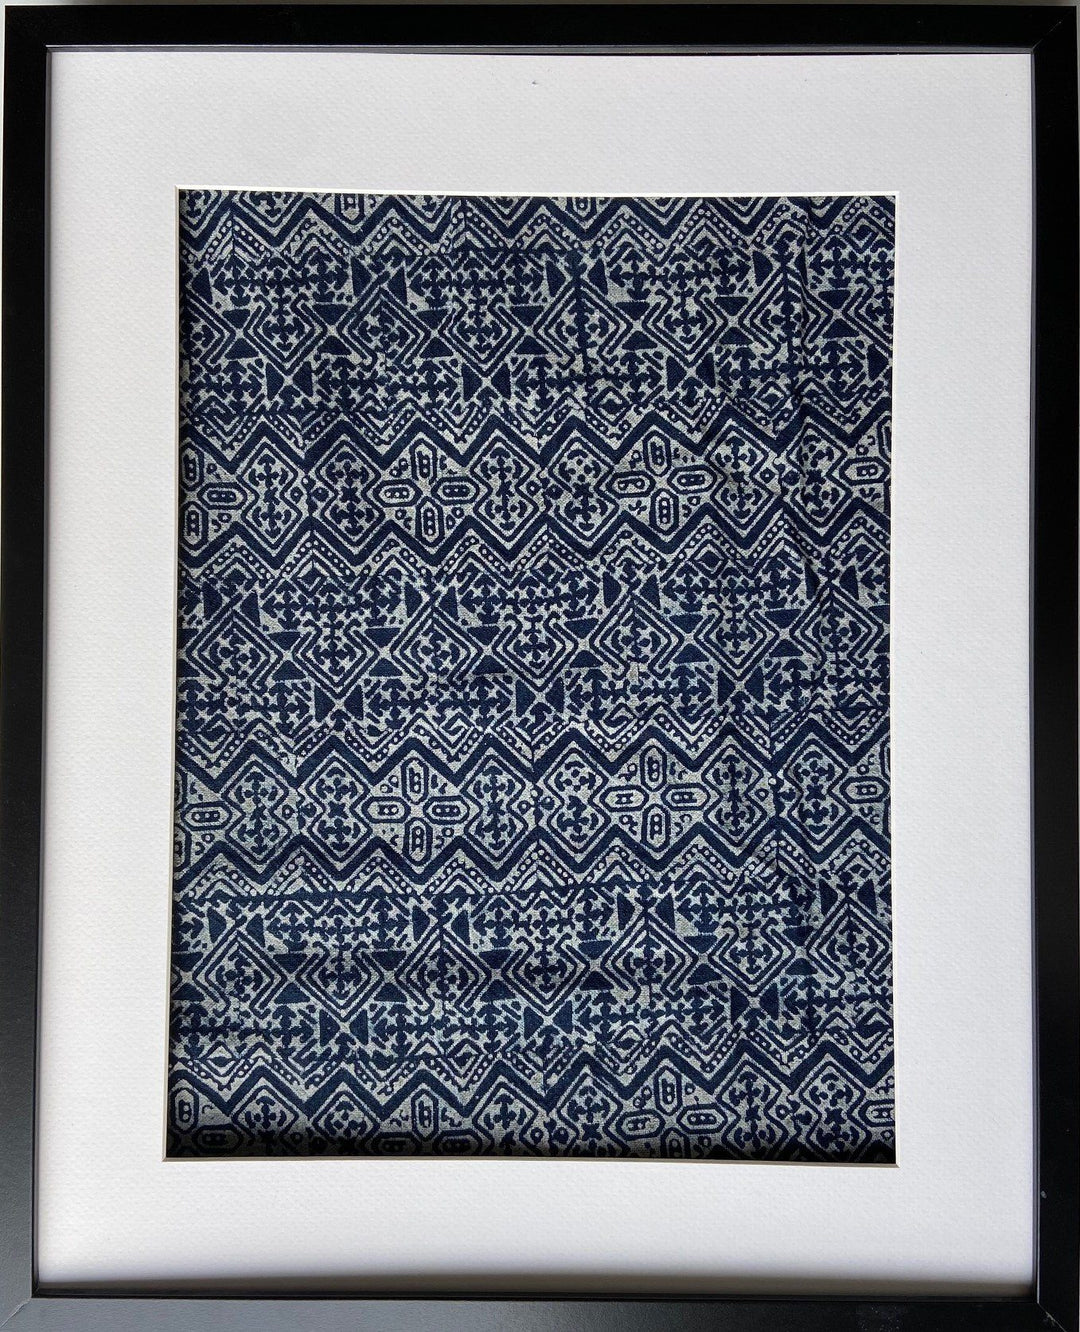 Indigo & Juniper's Batik fabrics are great for frames and hanging them around the house. Add them to your collection and awe your friends and family when they see your modern decor.